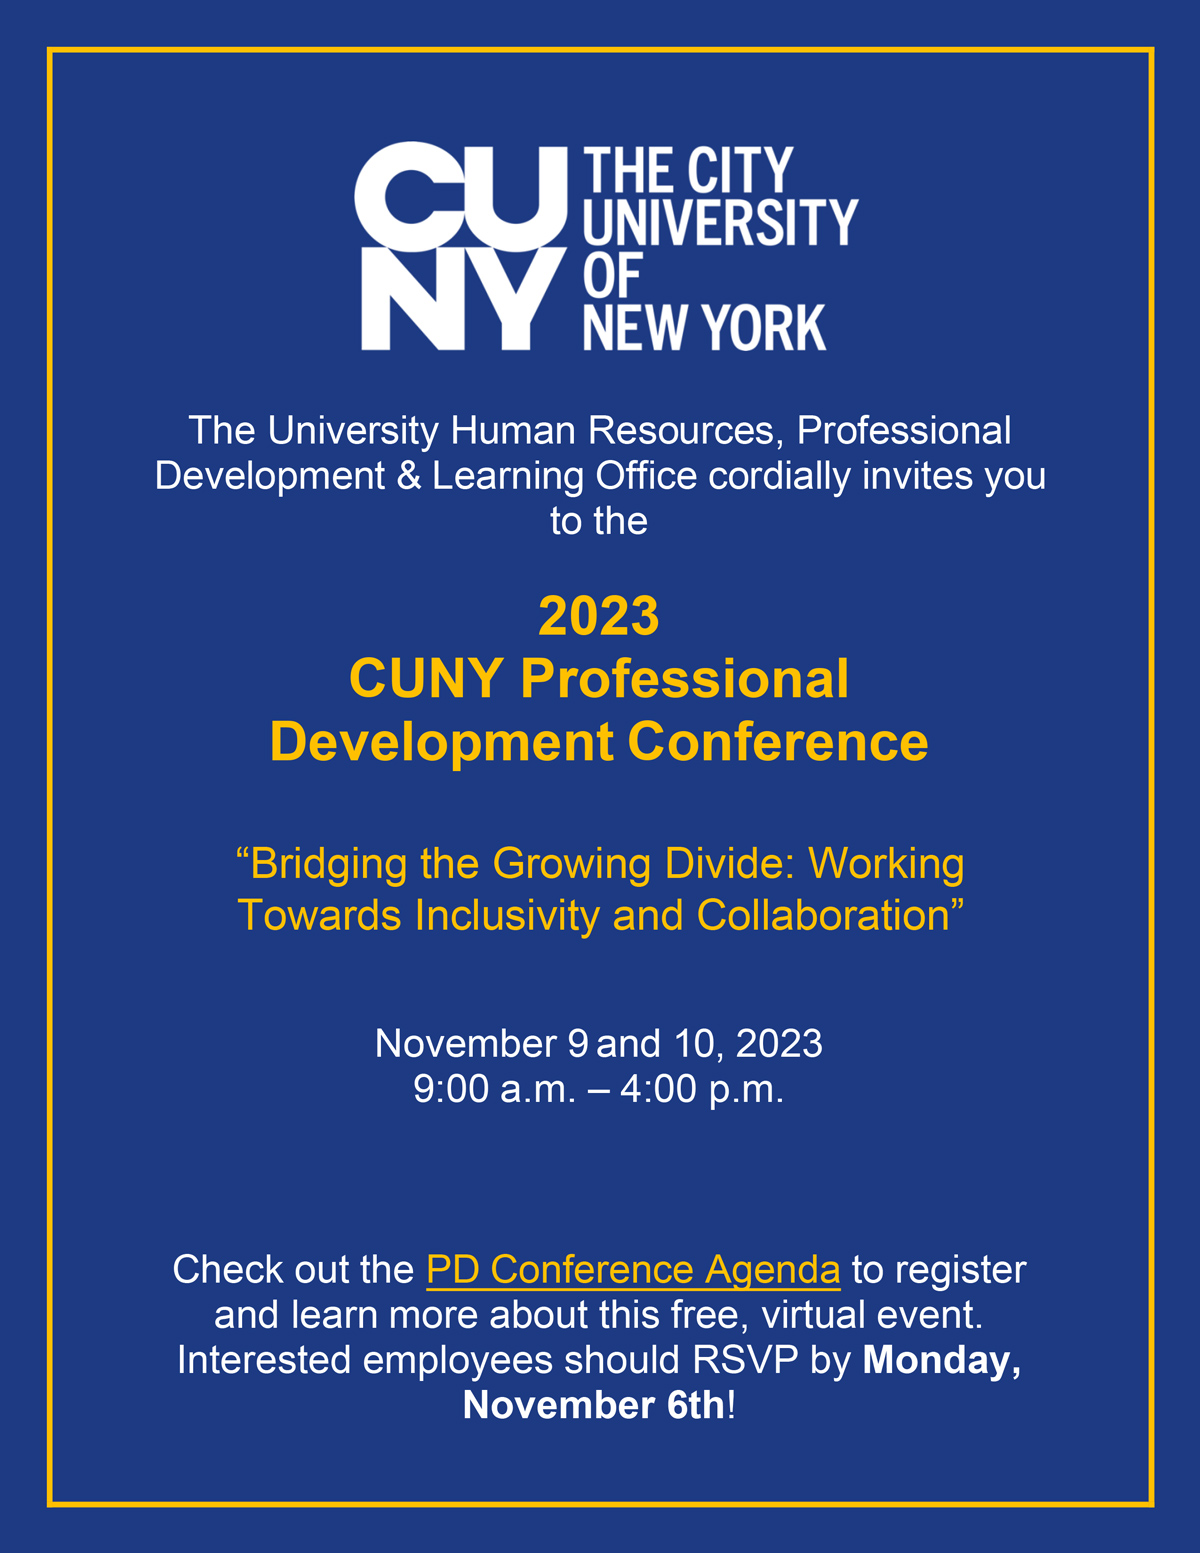 CUNY Professional Development Conference